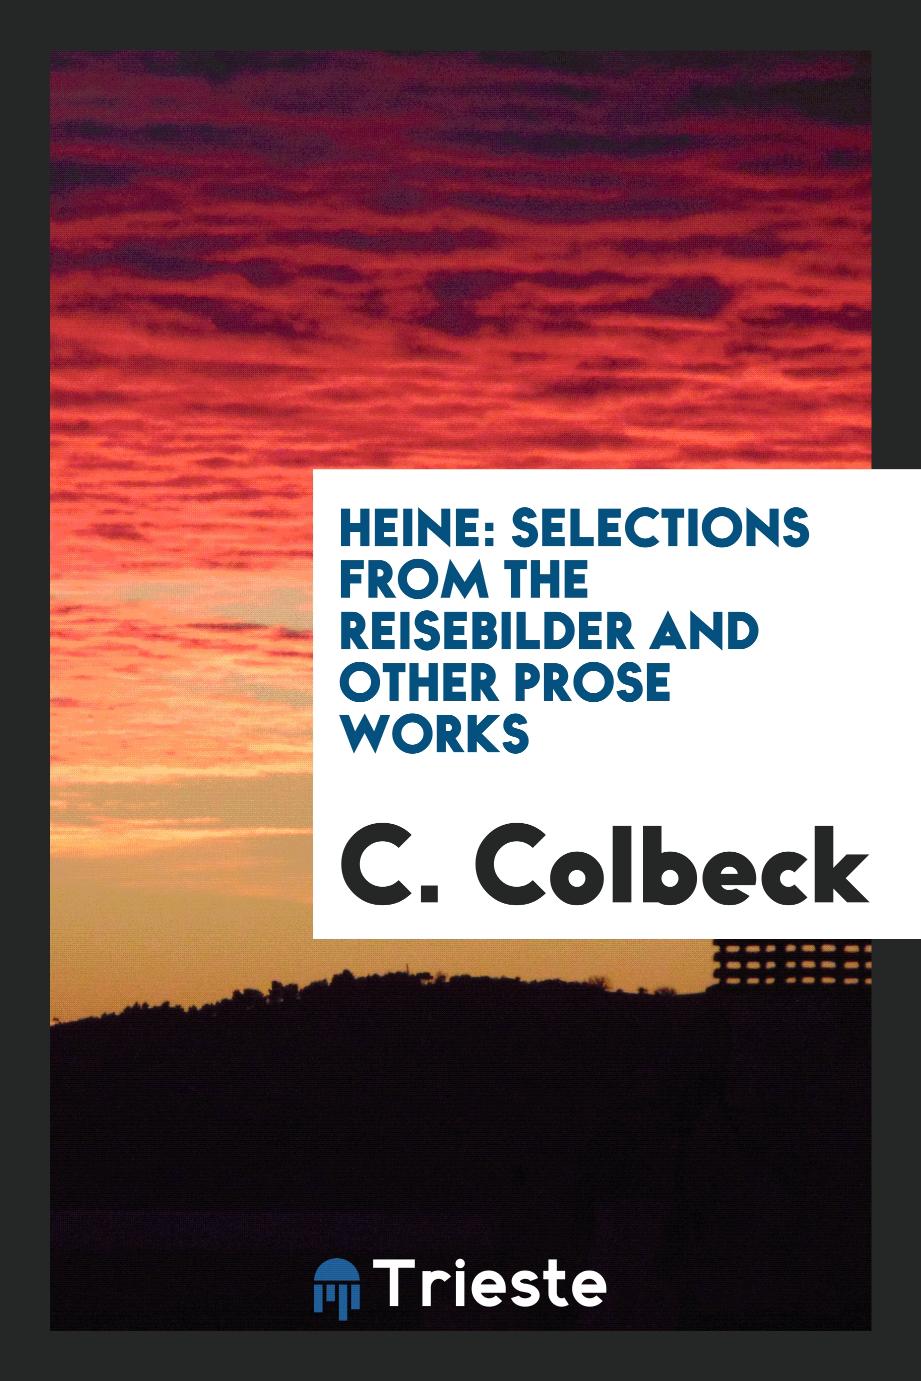 Heine: Selections from the Reisebilder and other prose works